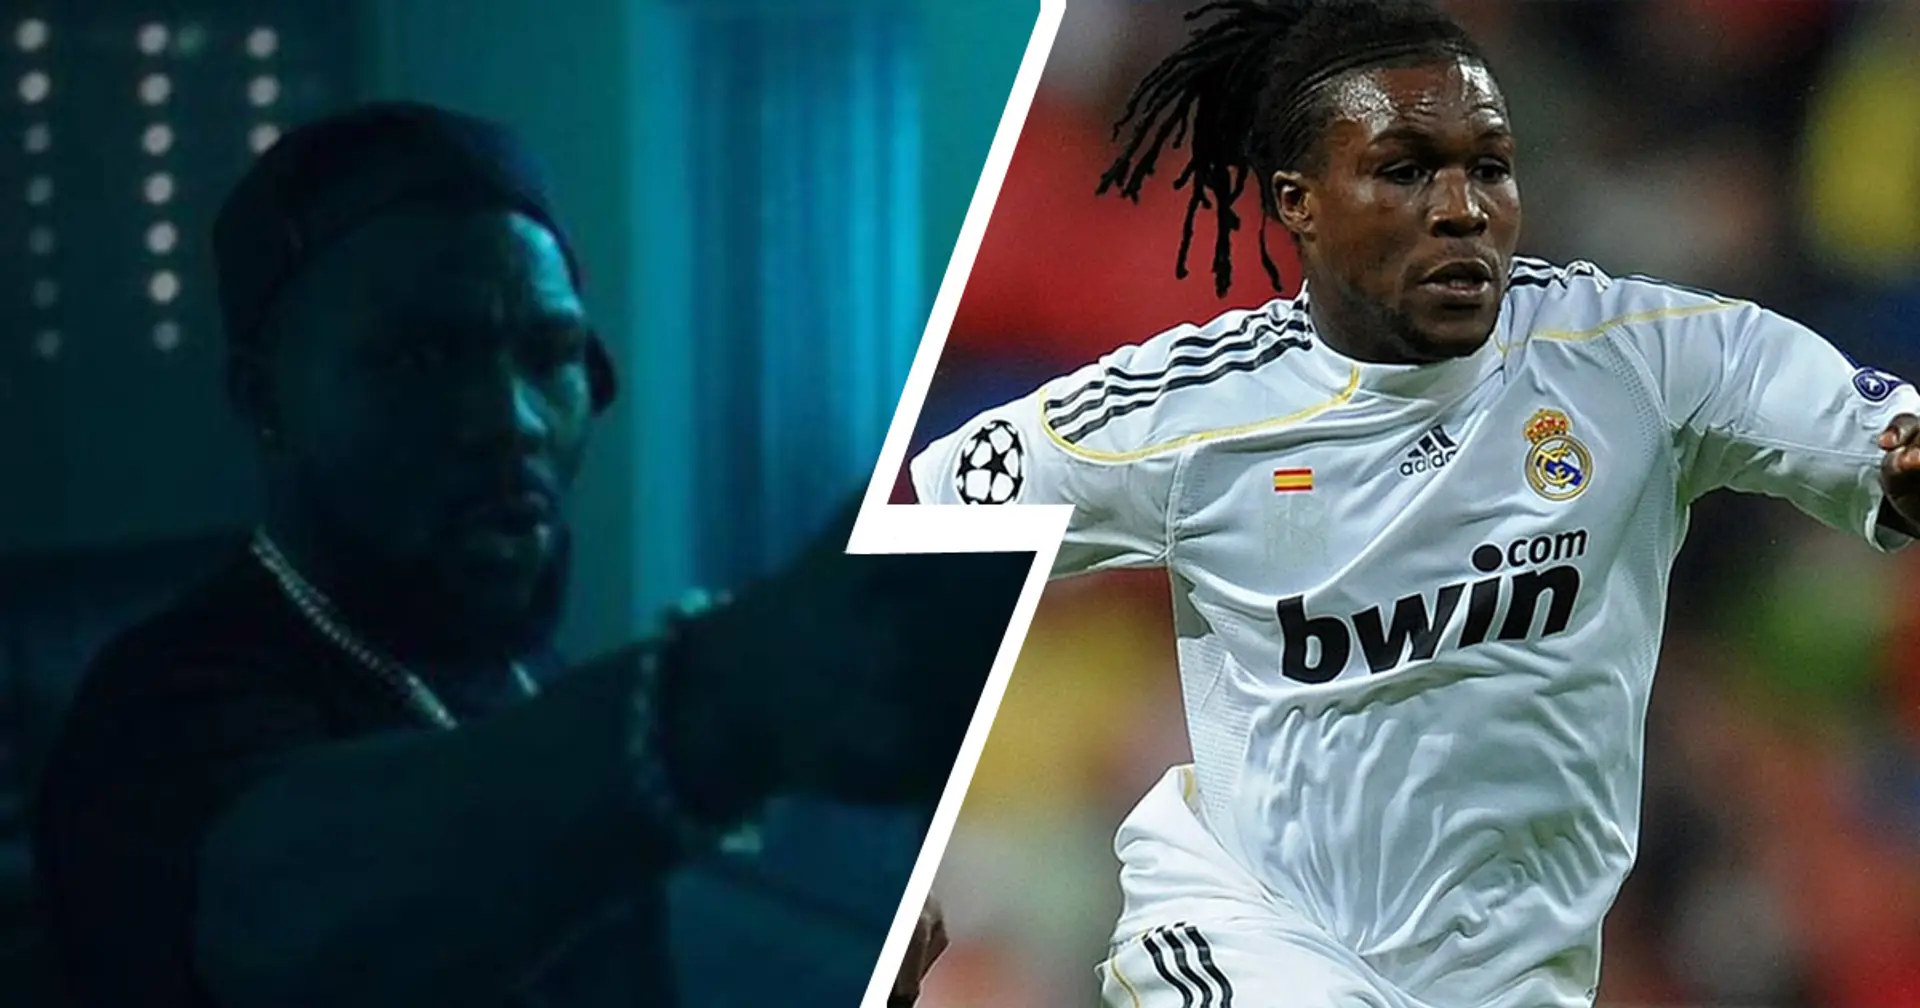 Former Madrid flop Royston Drenthe becomes actor in Dutch mafia series